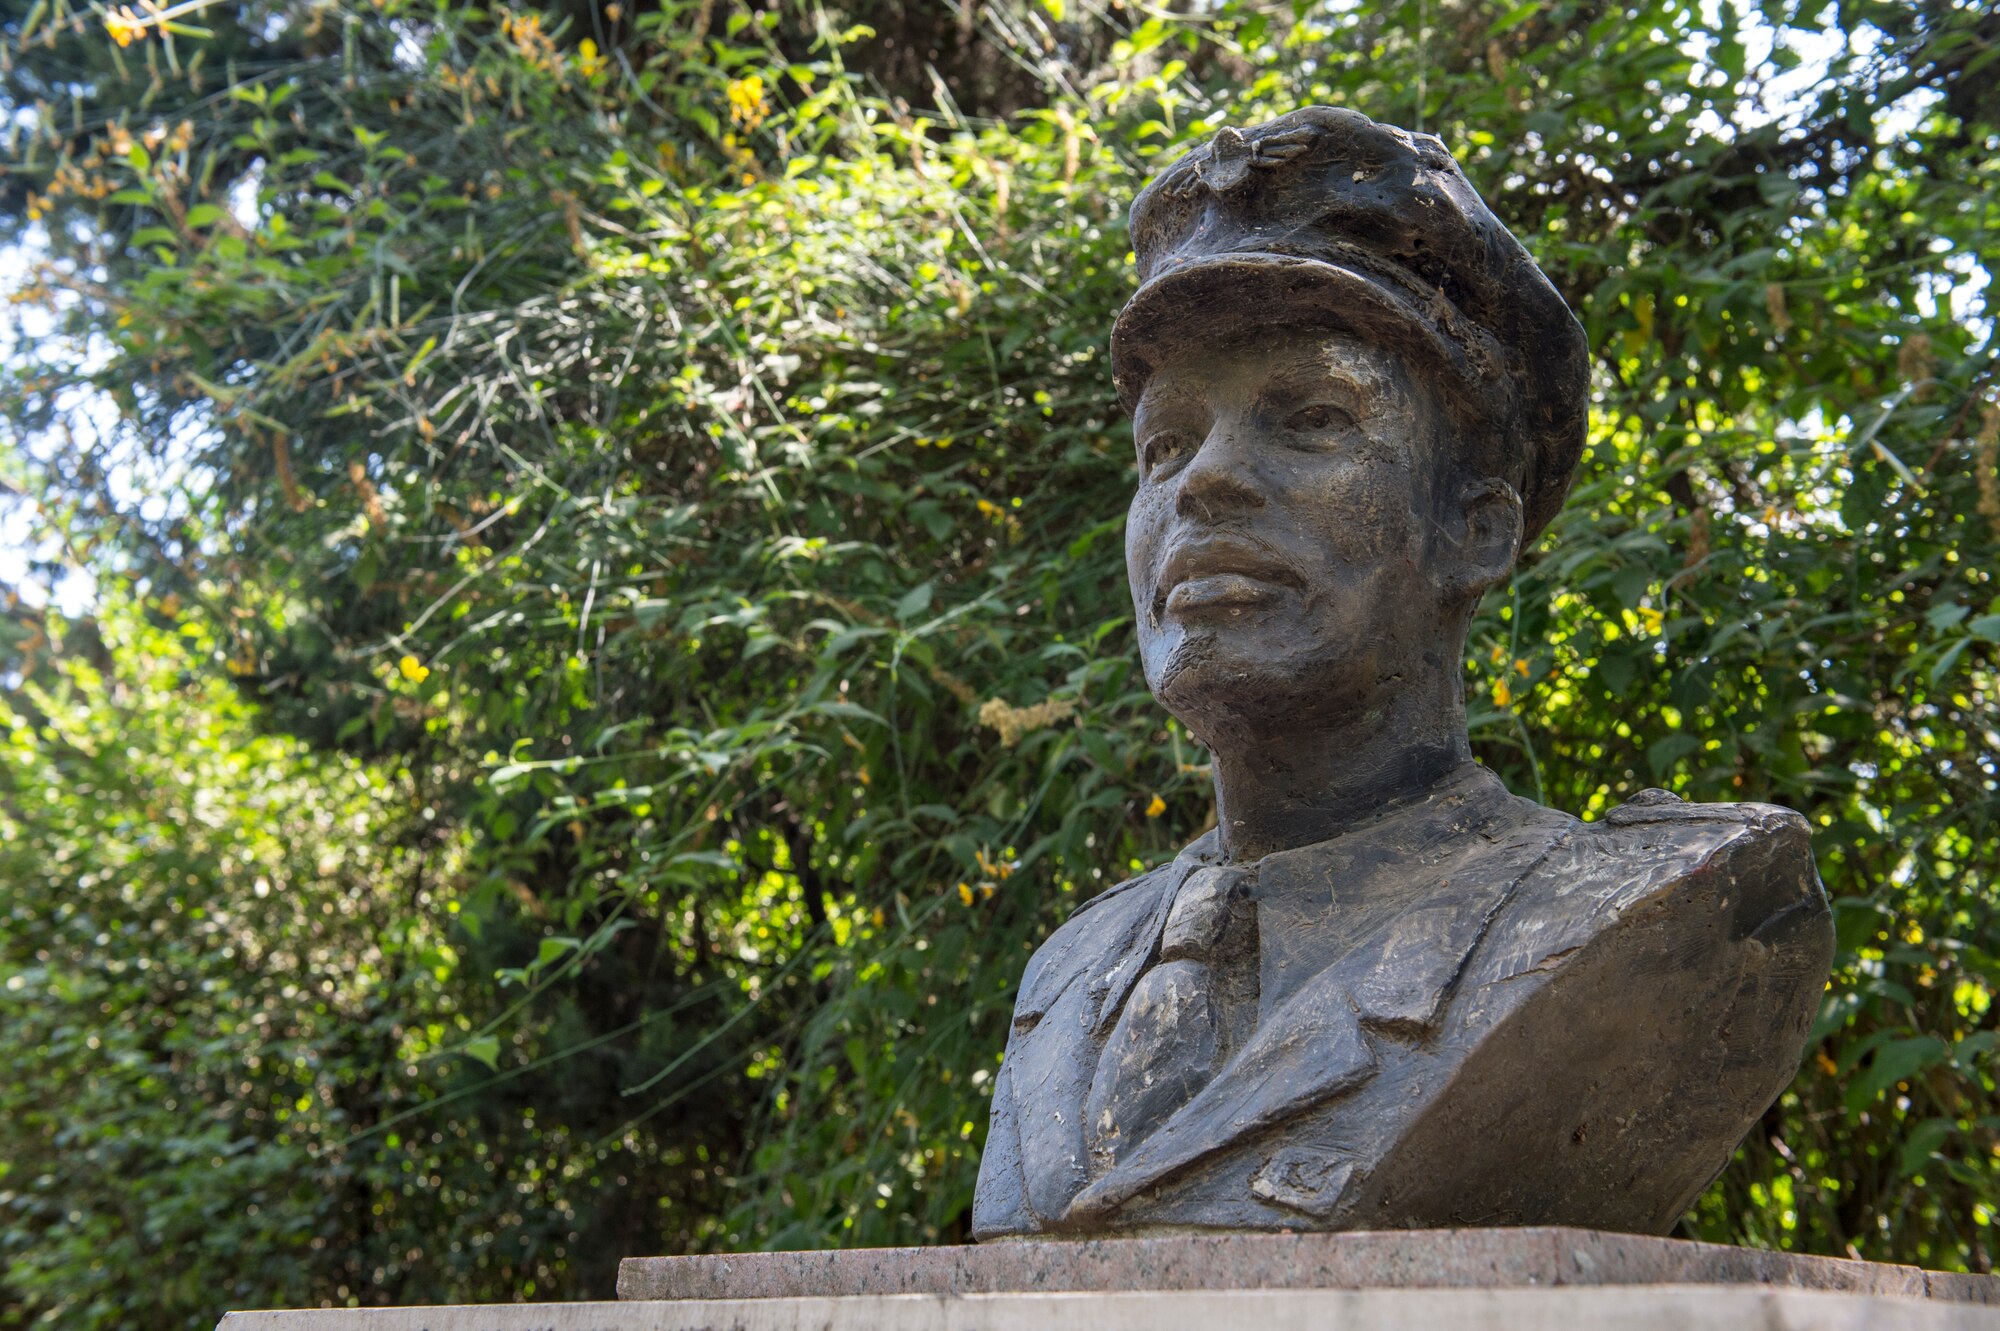 A bust of the American-born Ethiopian air force Col. John Robinson overlooks the Addis Ababa War Cemetery in Ethiopia Jan. 11, 2020. Robinson is considered a national hero of Ethiopia who pioneered flight schools in the U.S. and Ethiopia. (U.S. Air Force photo by Staff Sgt. Sarah Brice)